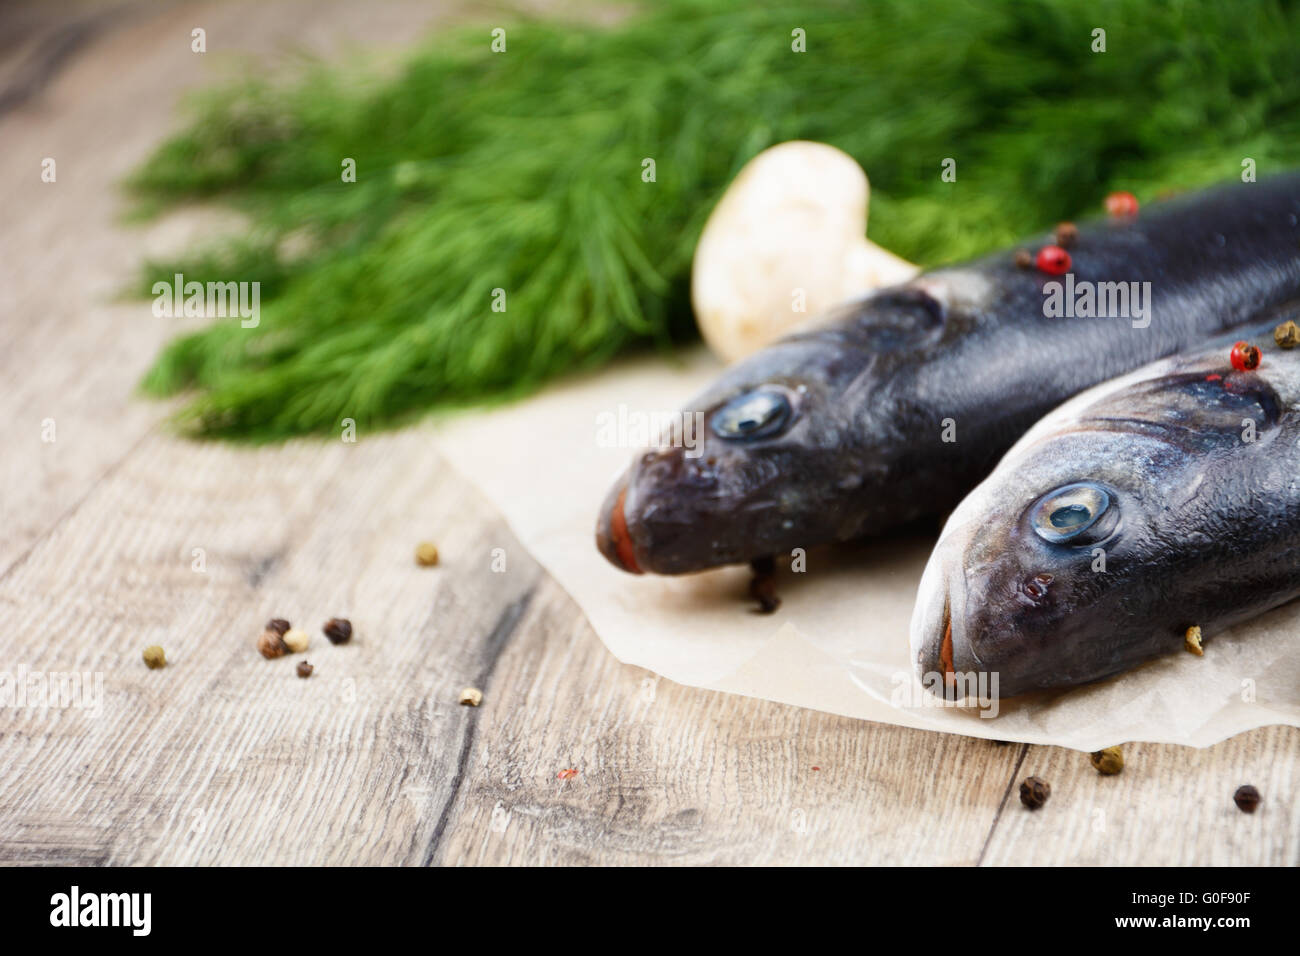 Raw seabass fish on the wooden board Stock Photo